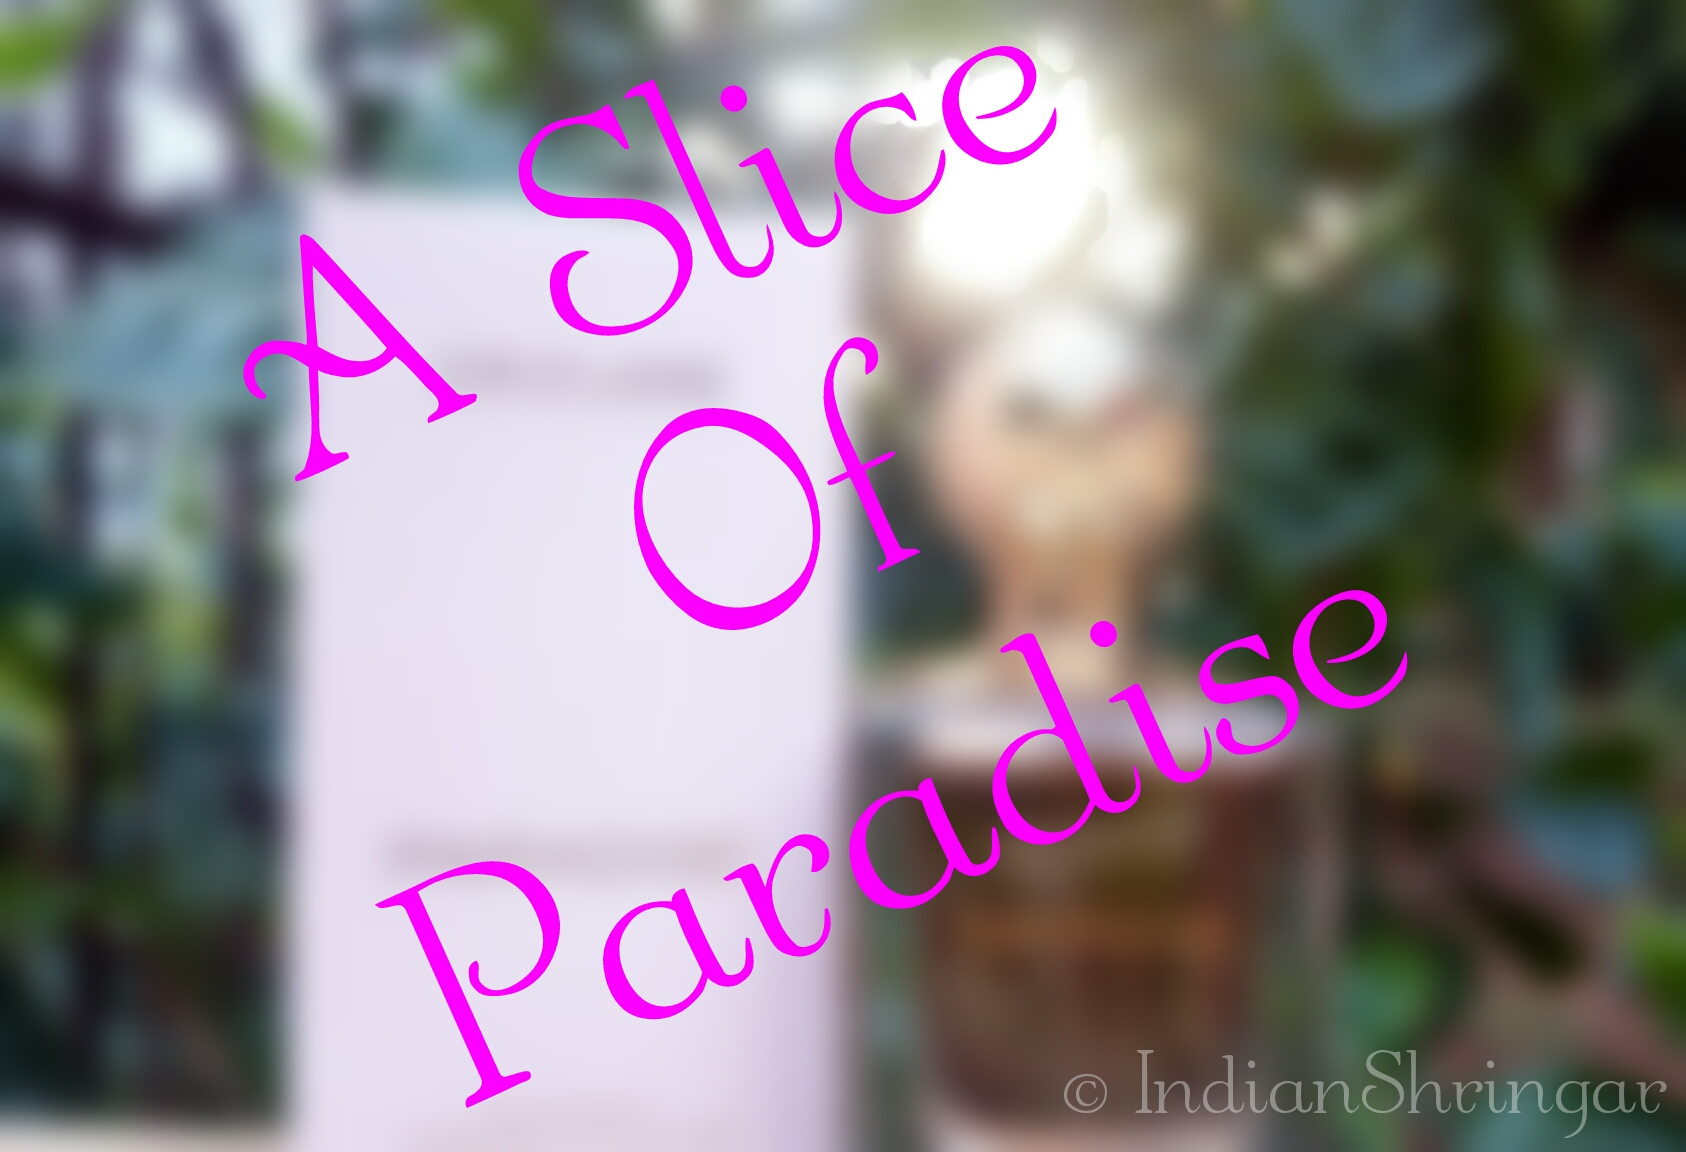 Paradise EDP by Oriflame review